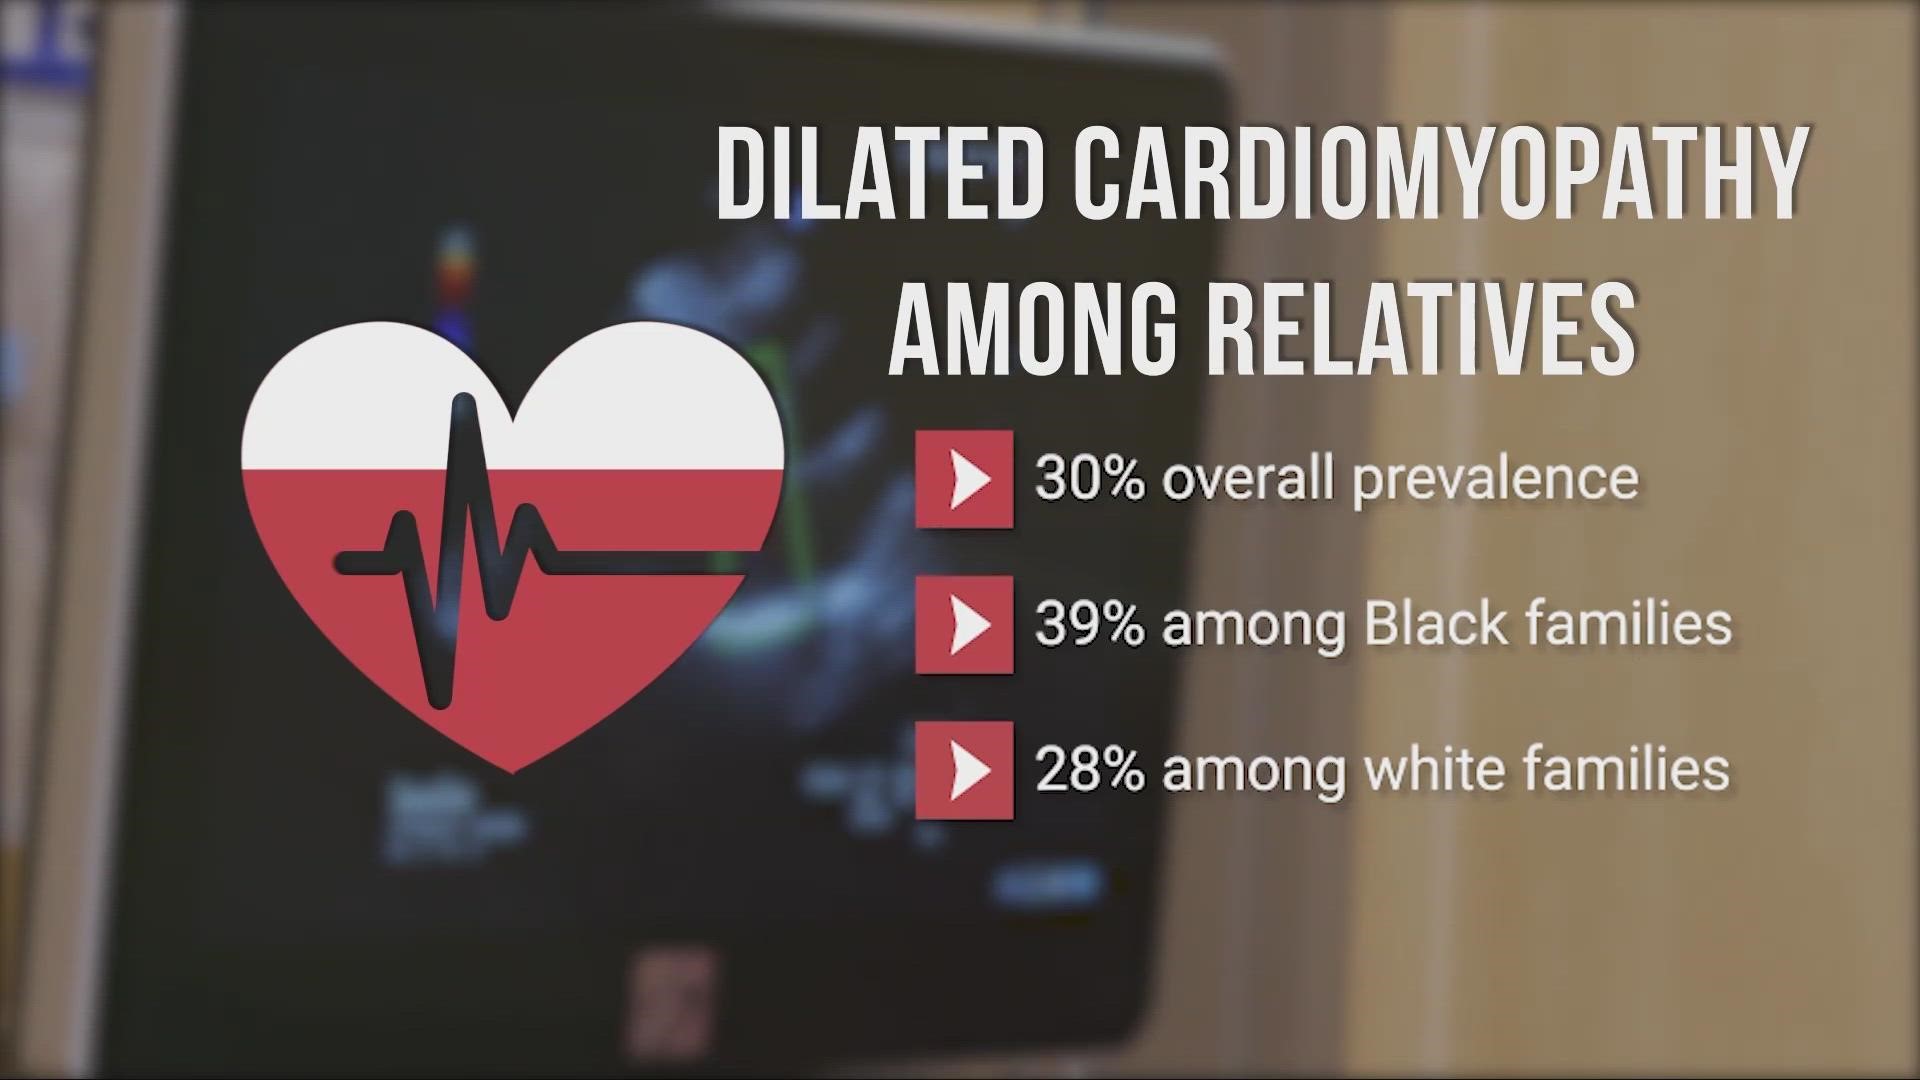 Black patients diagnosed with the heart condition dilated cardiomyopathy, of unknown cause, are more likely to have family members at risk.